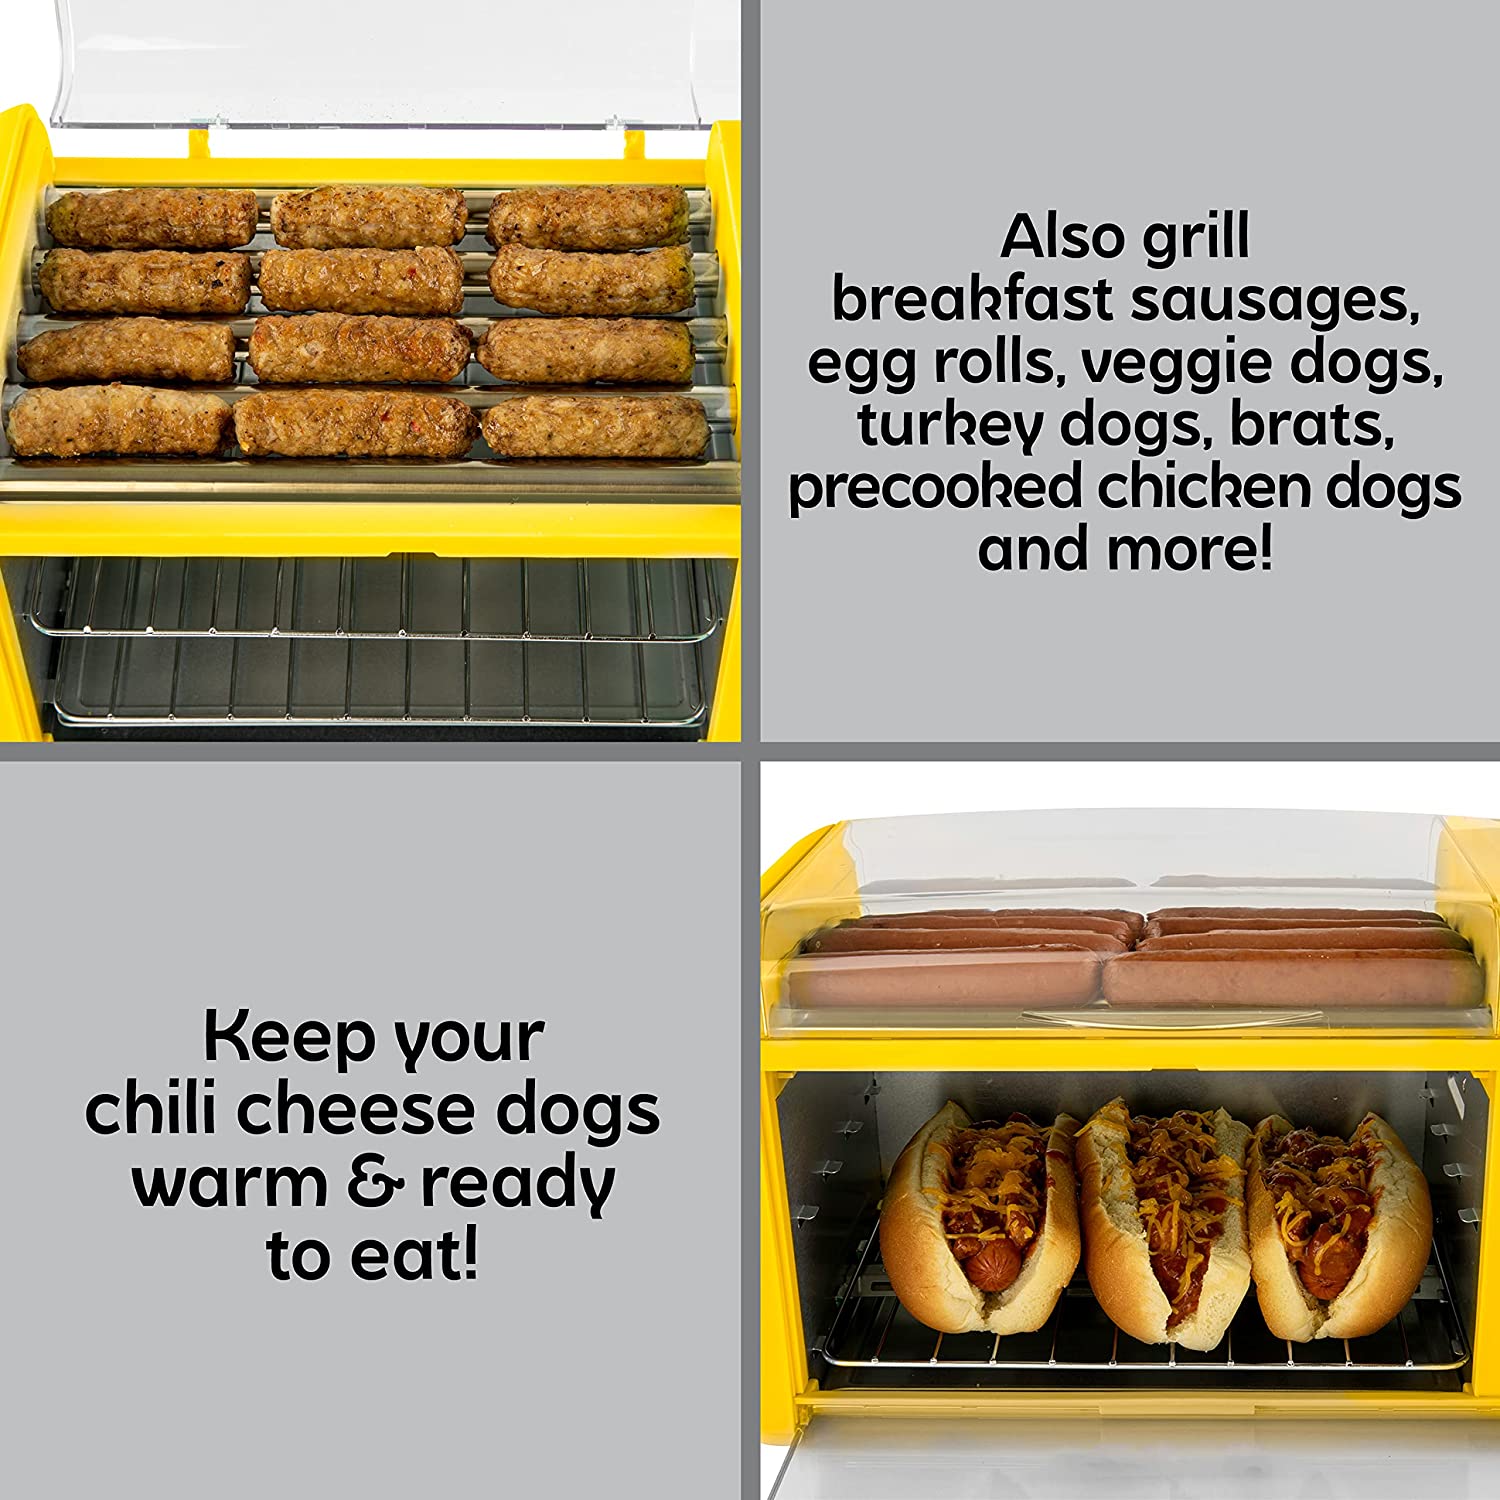 A hot dog toaster oven filled with hotdogs and another oven filled with turkey rolls cooking in a hot dog oven.